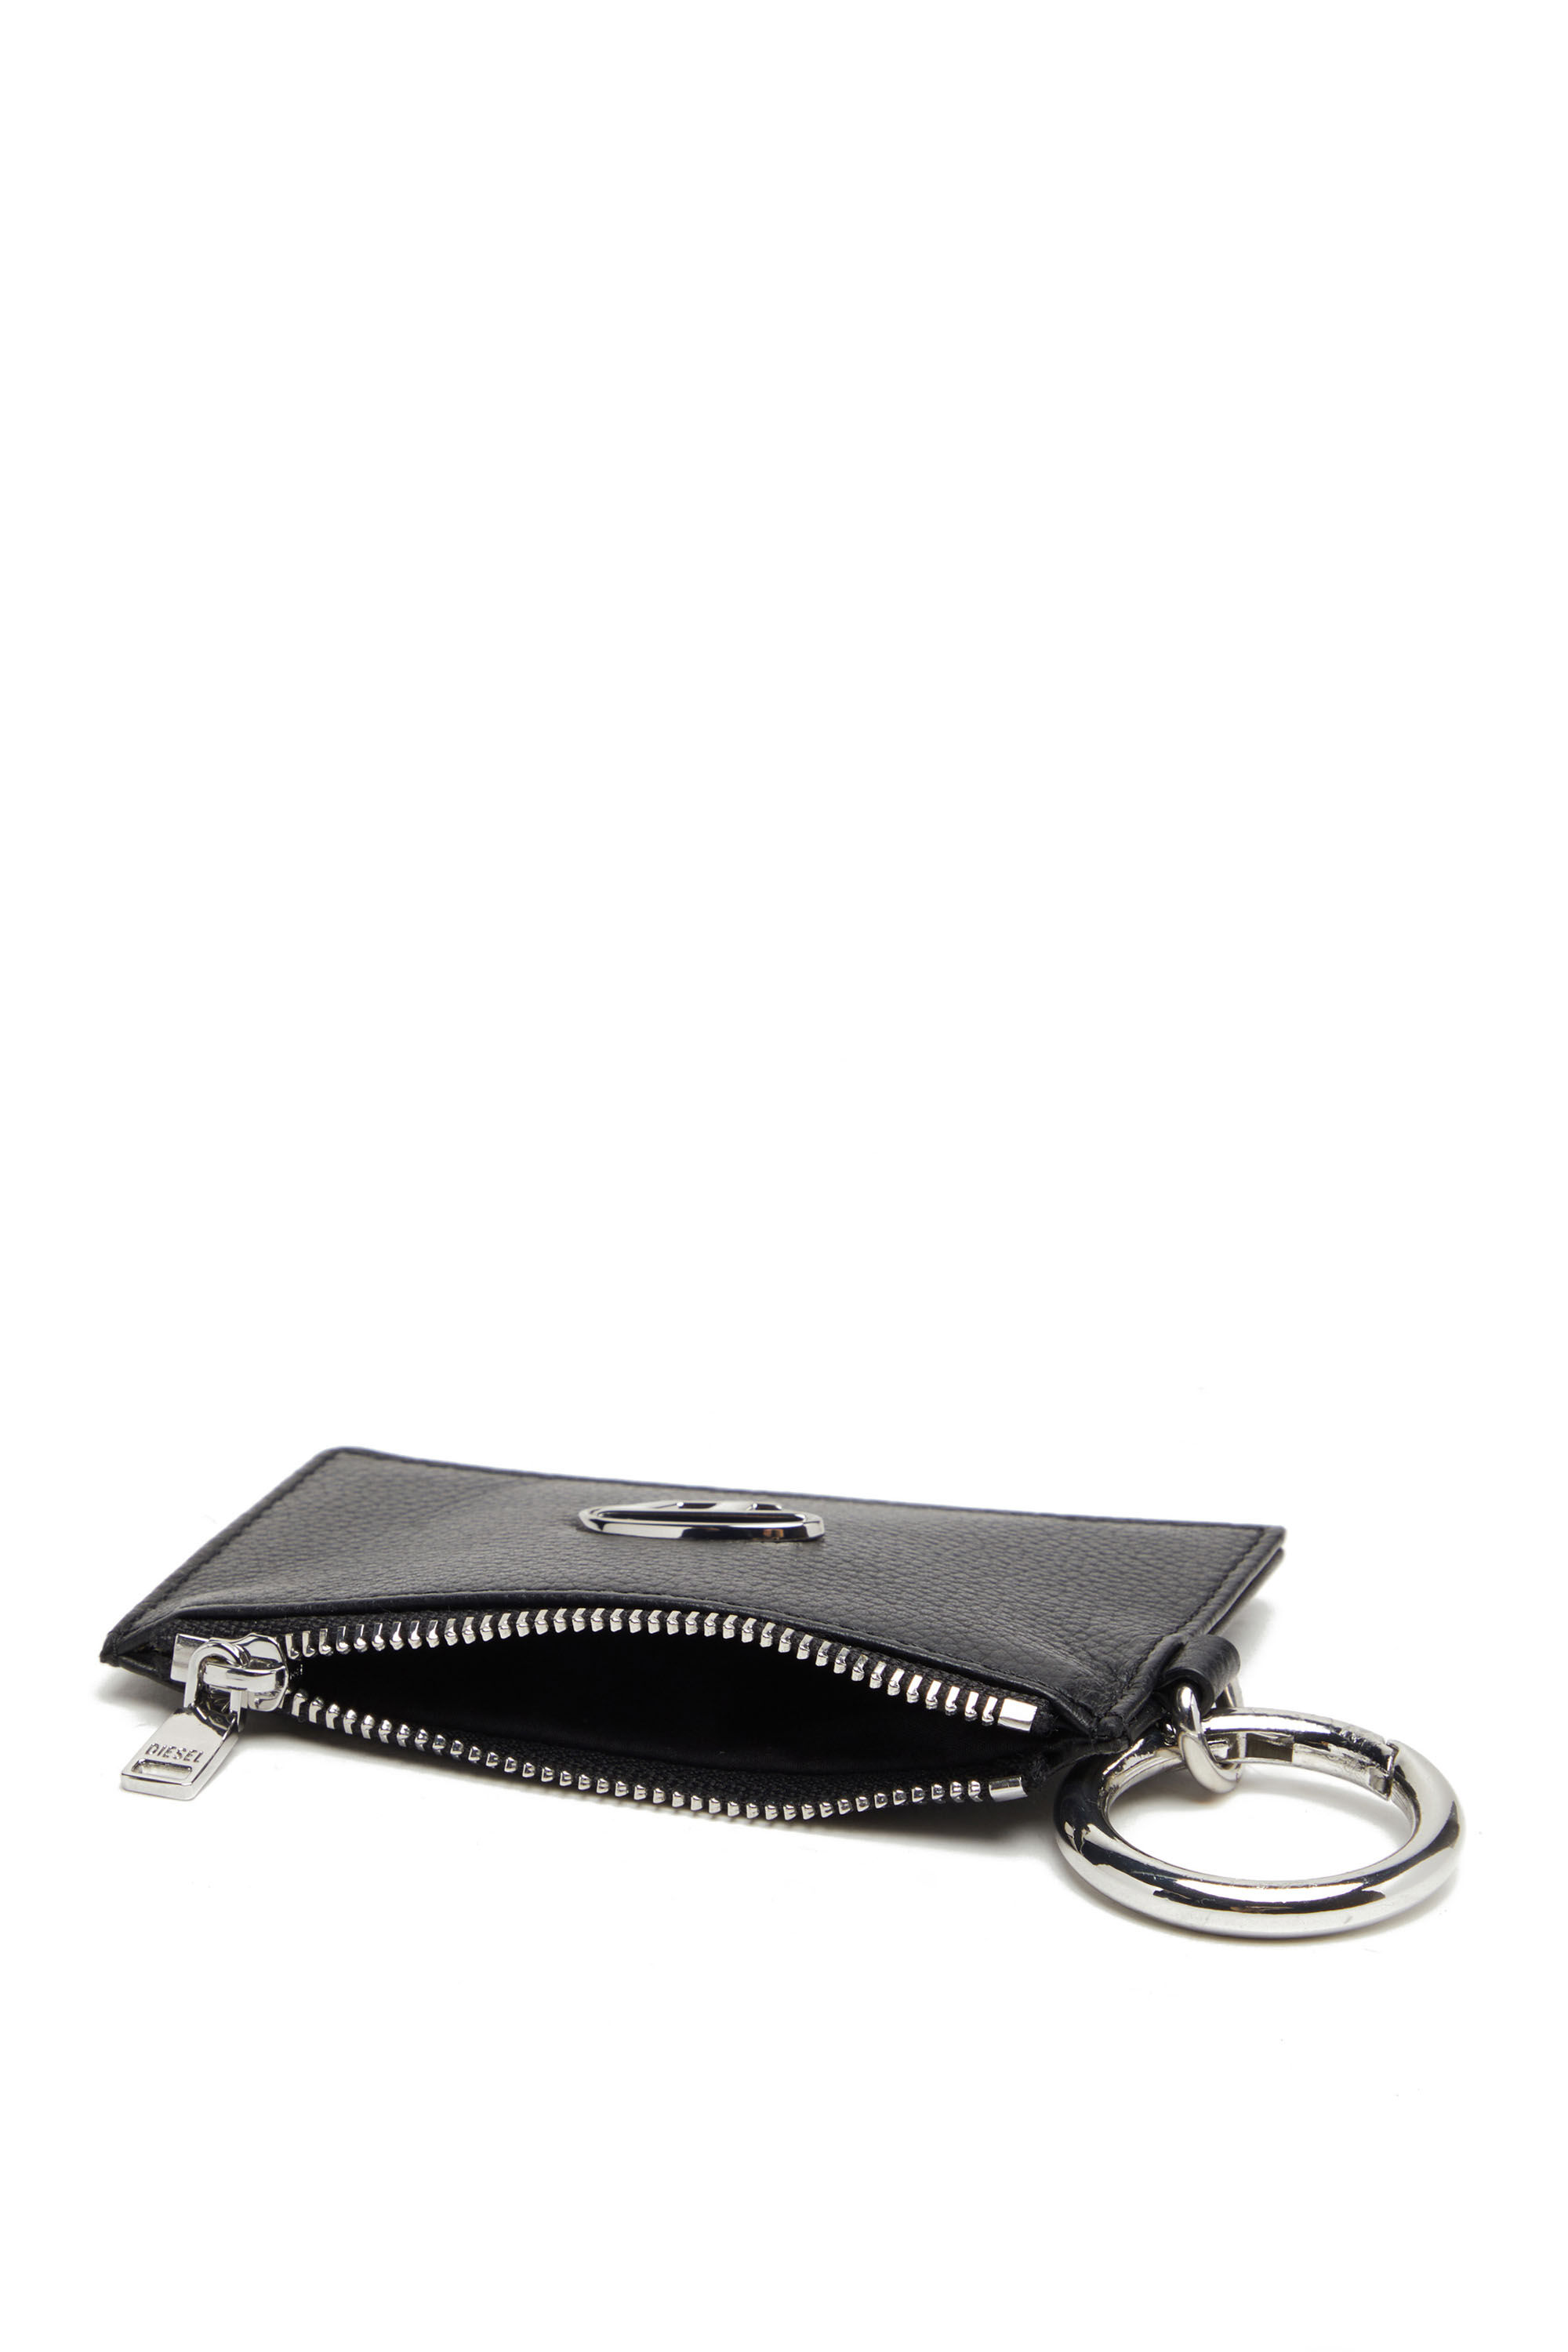 CARD POUCH: Slim leather coin and card holder | Diesel